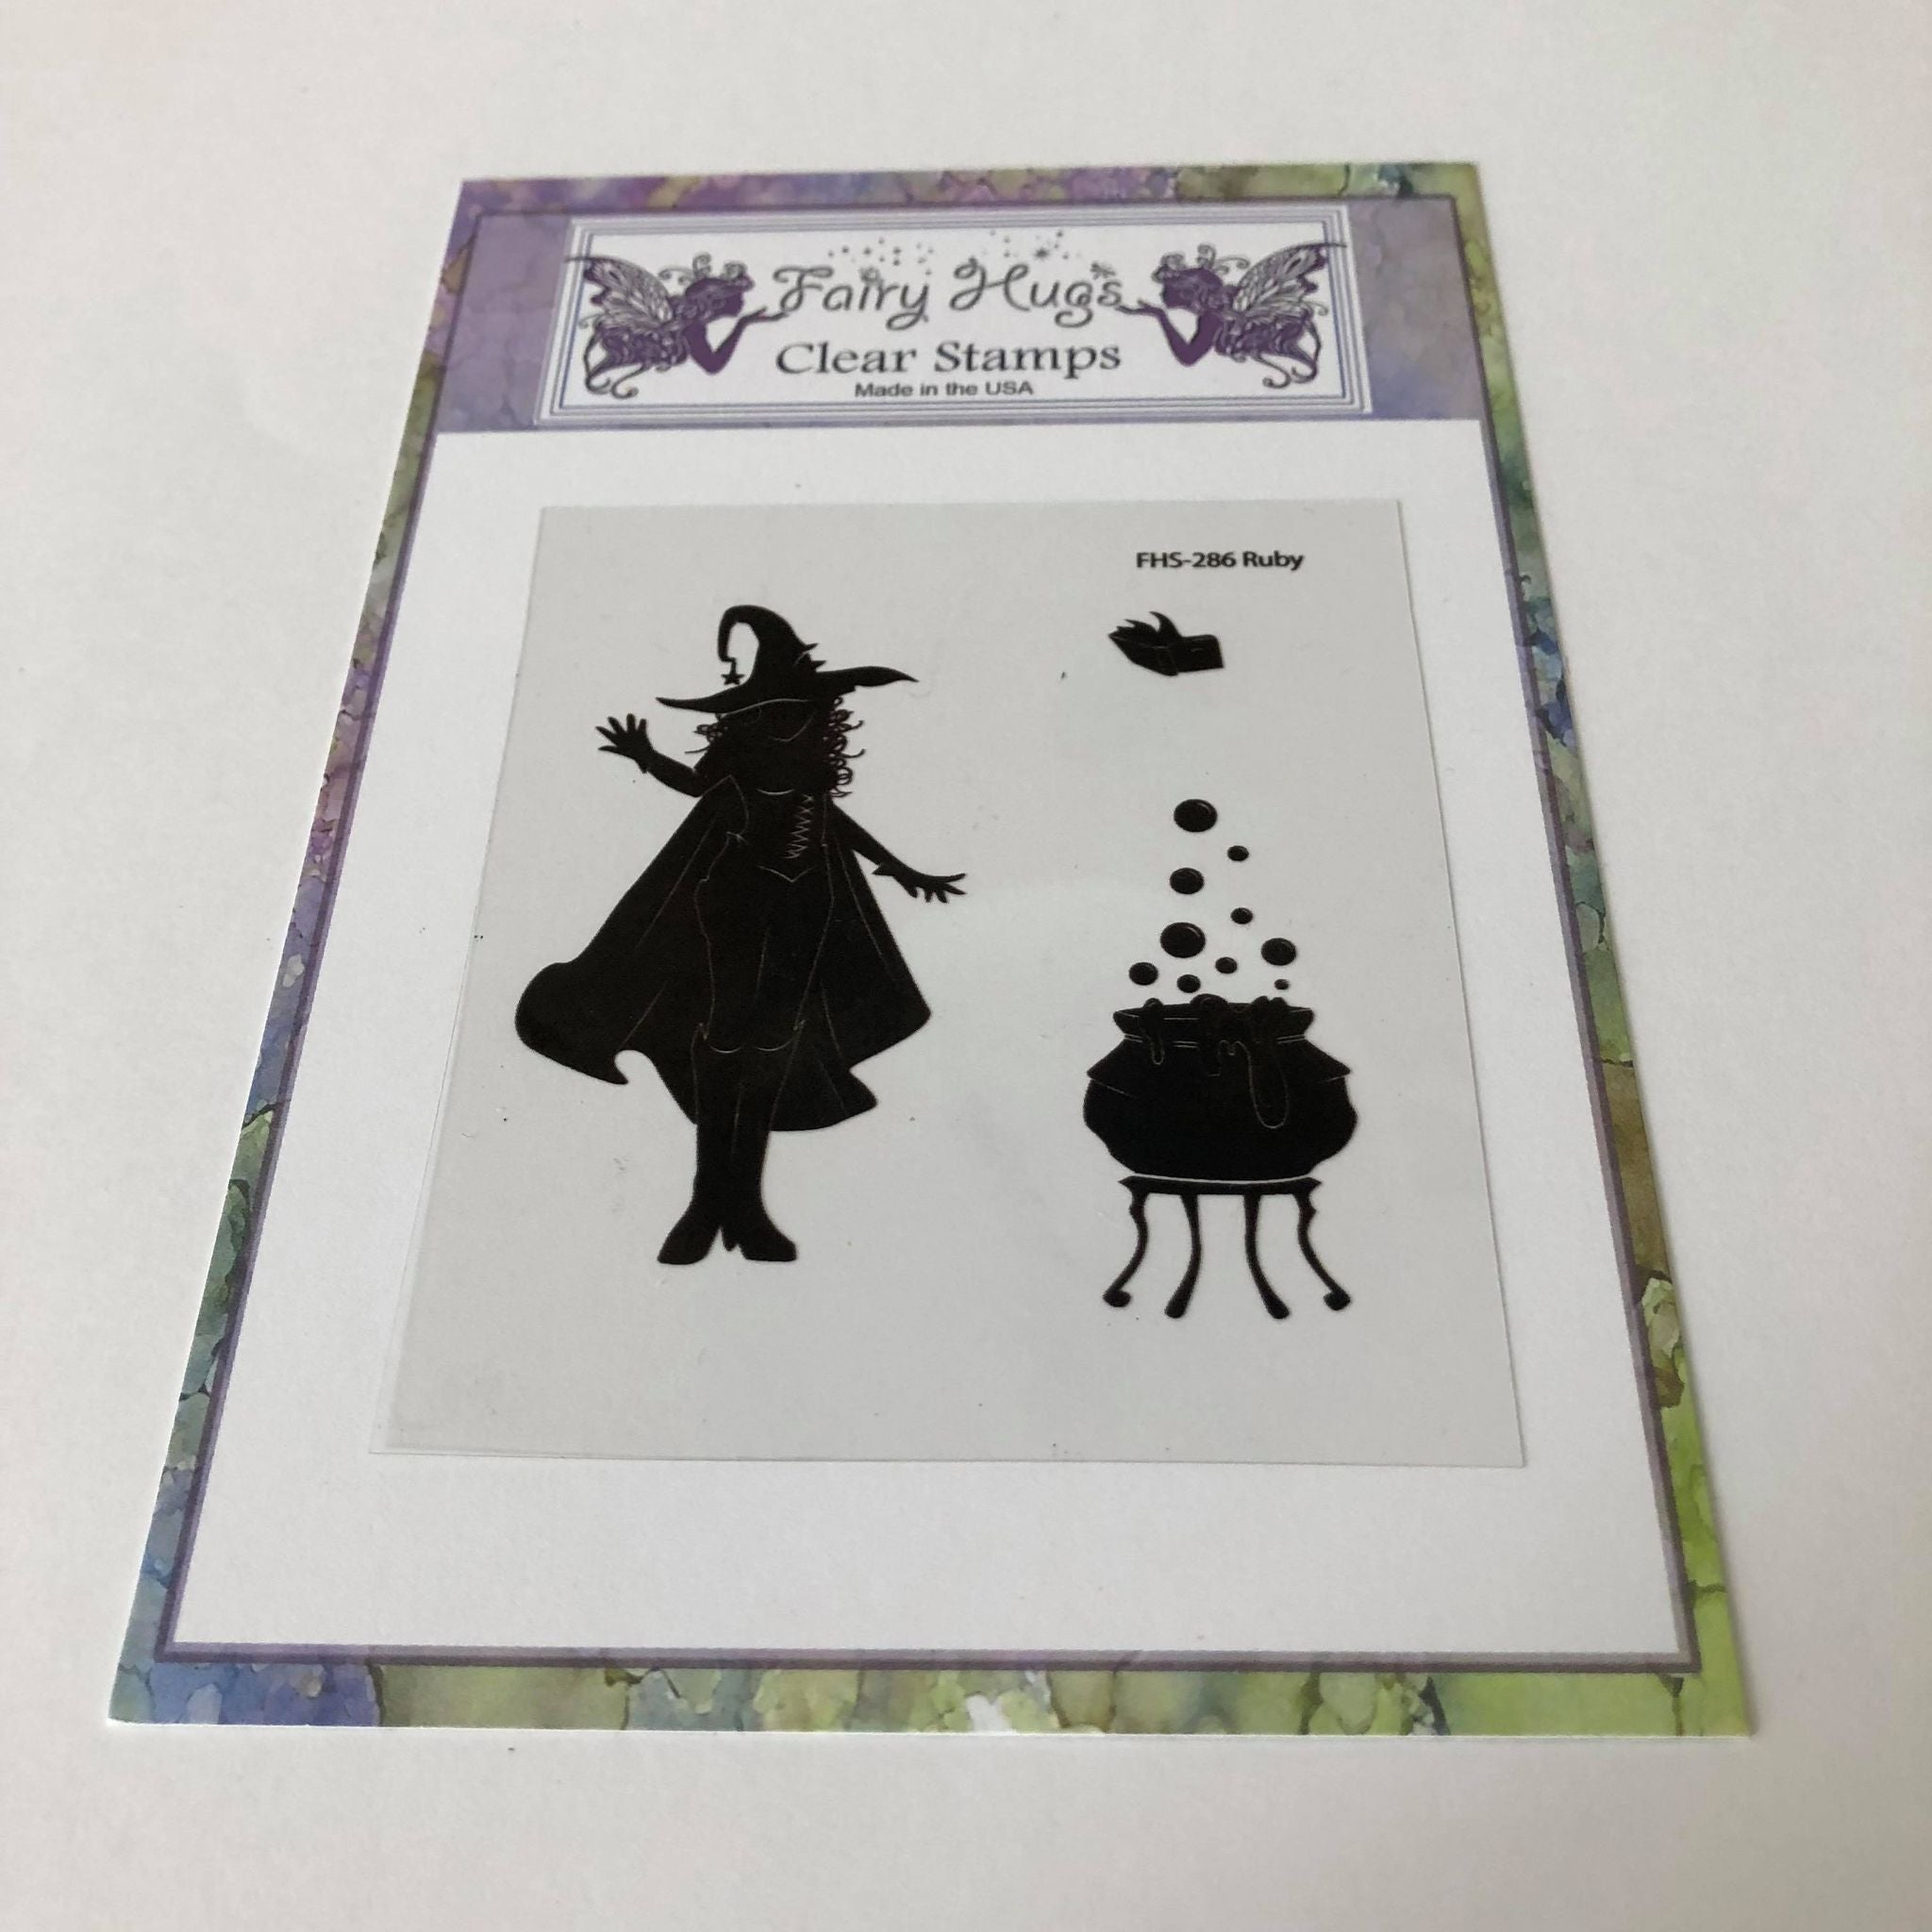 Fairy Hugs Stamps - Ruby